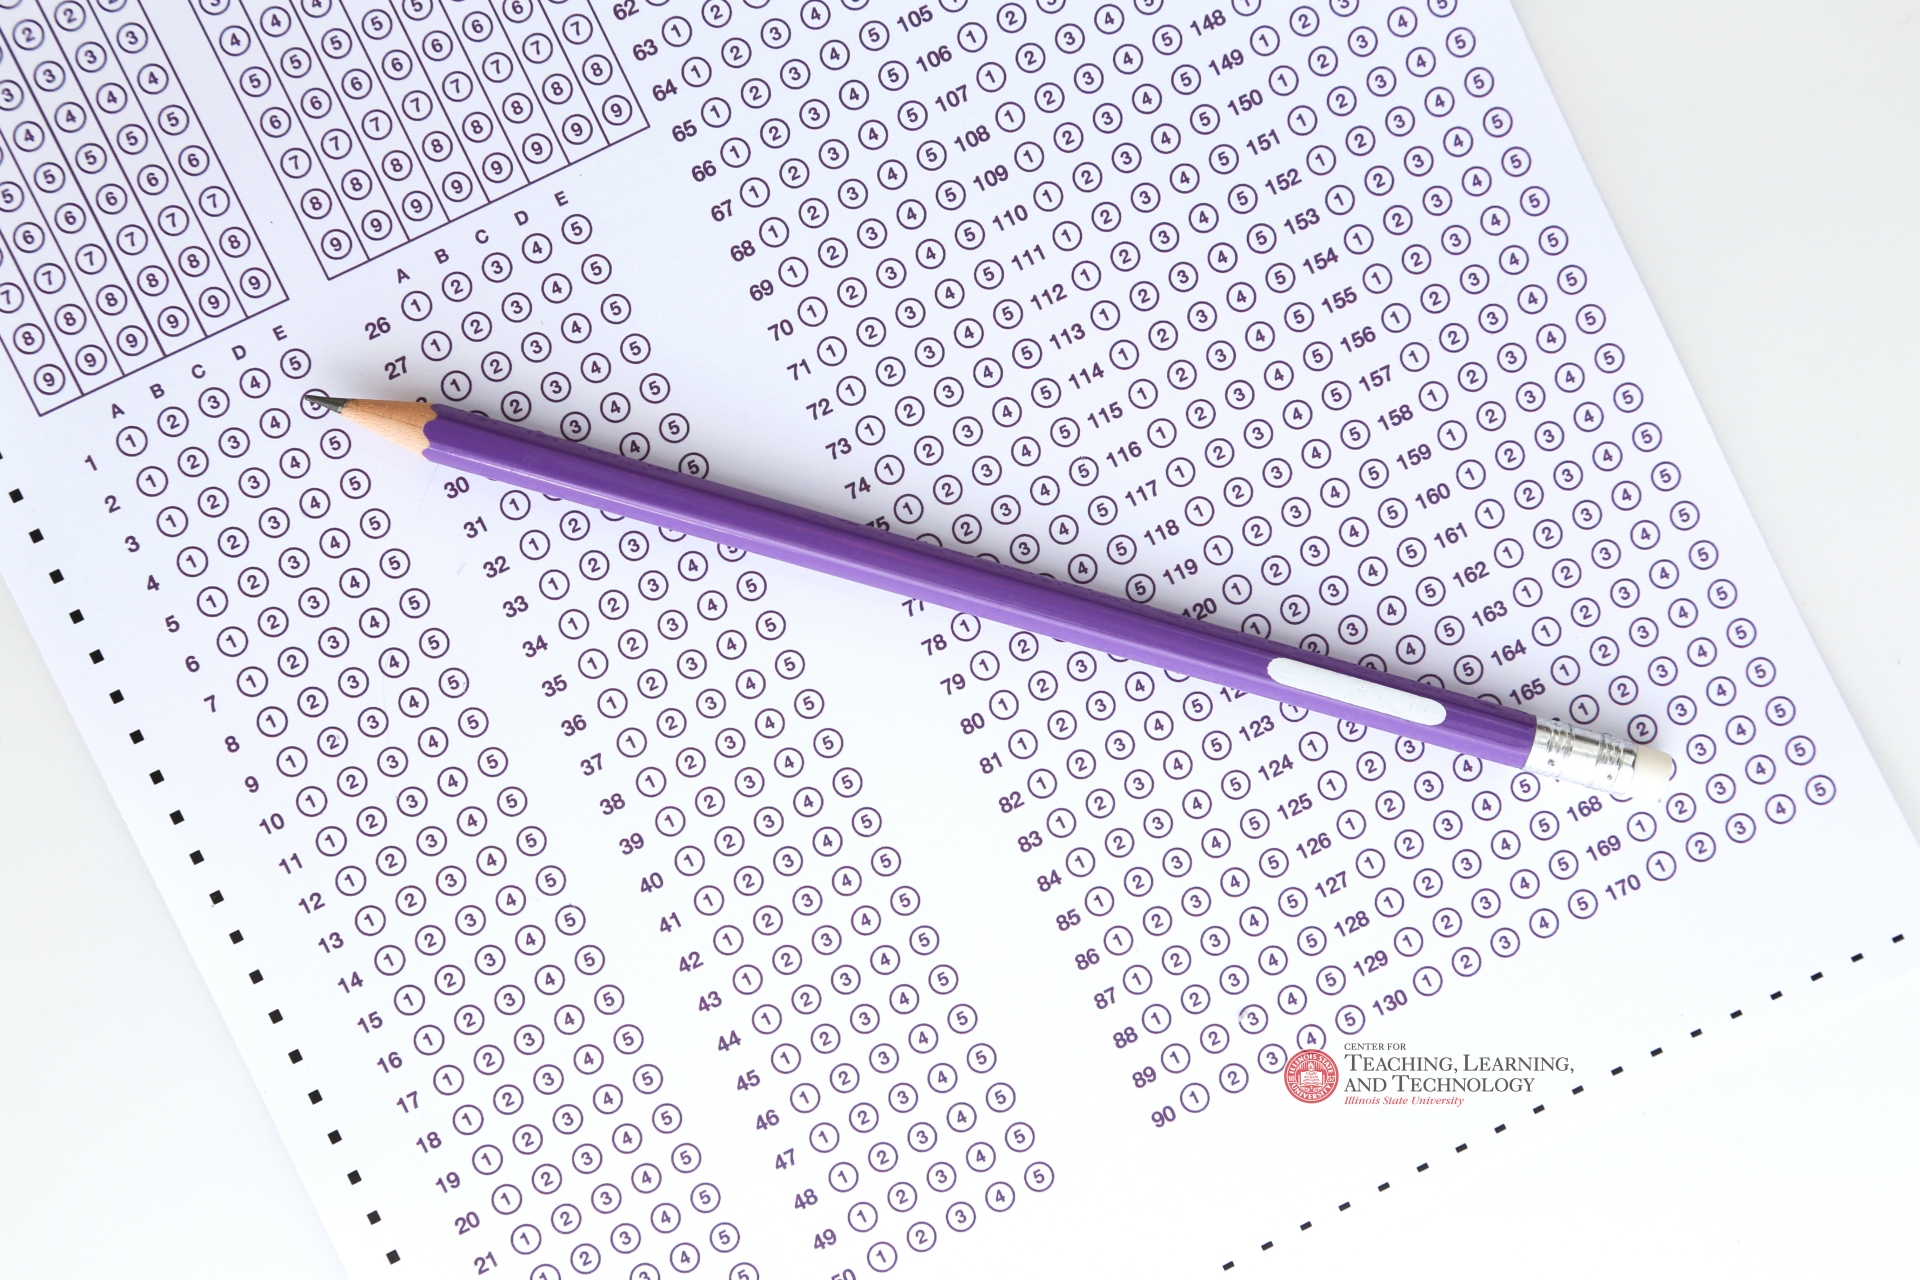 A pencil laying atop a blank Opscan evaluation form, with the Center for Teaching, Learning, and Technology logo.